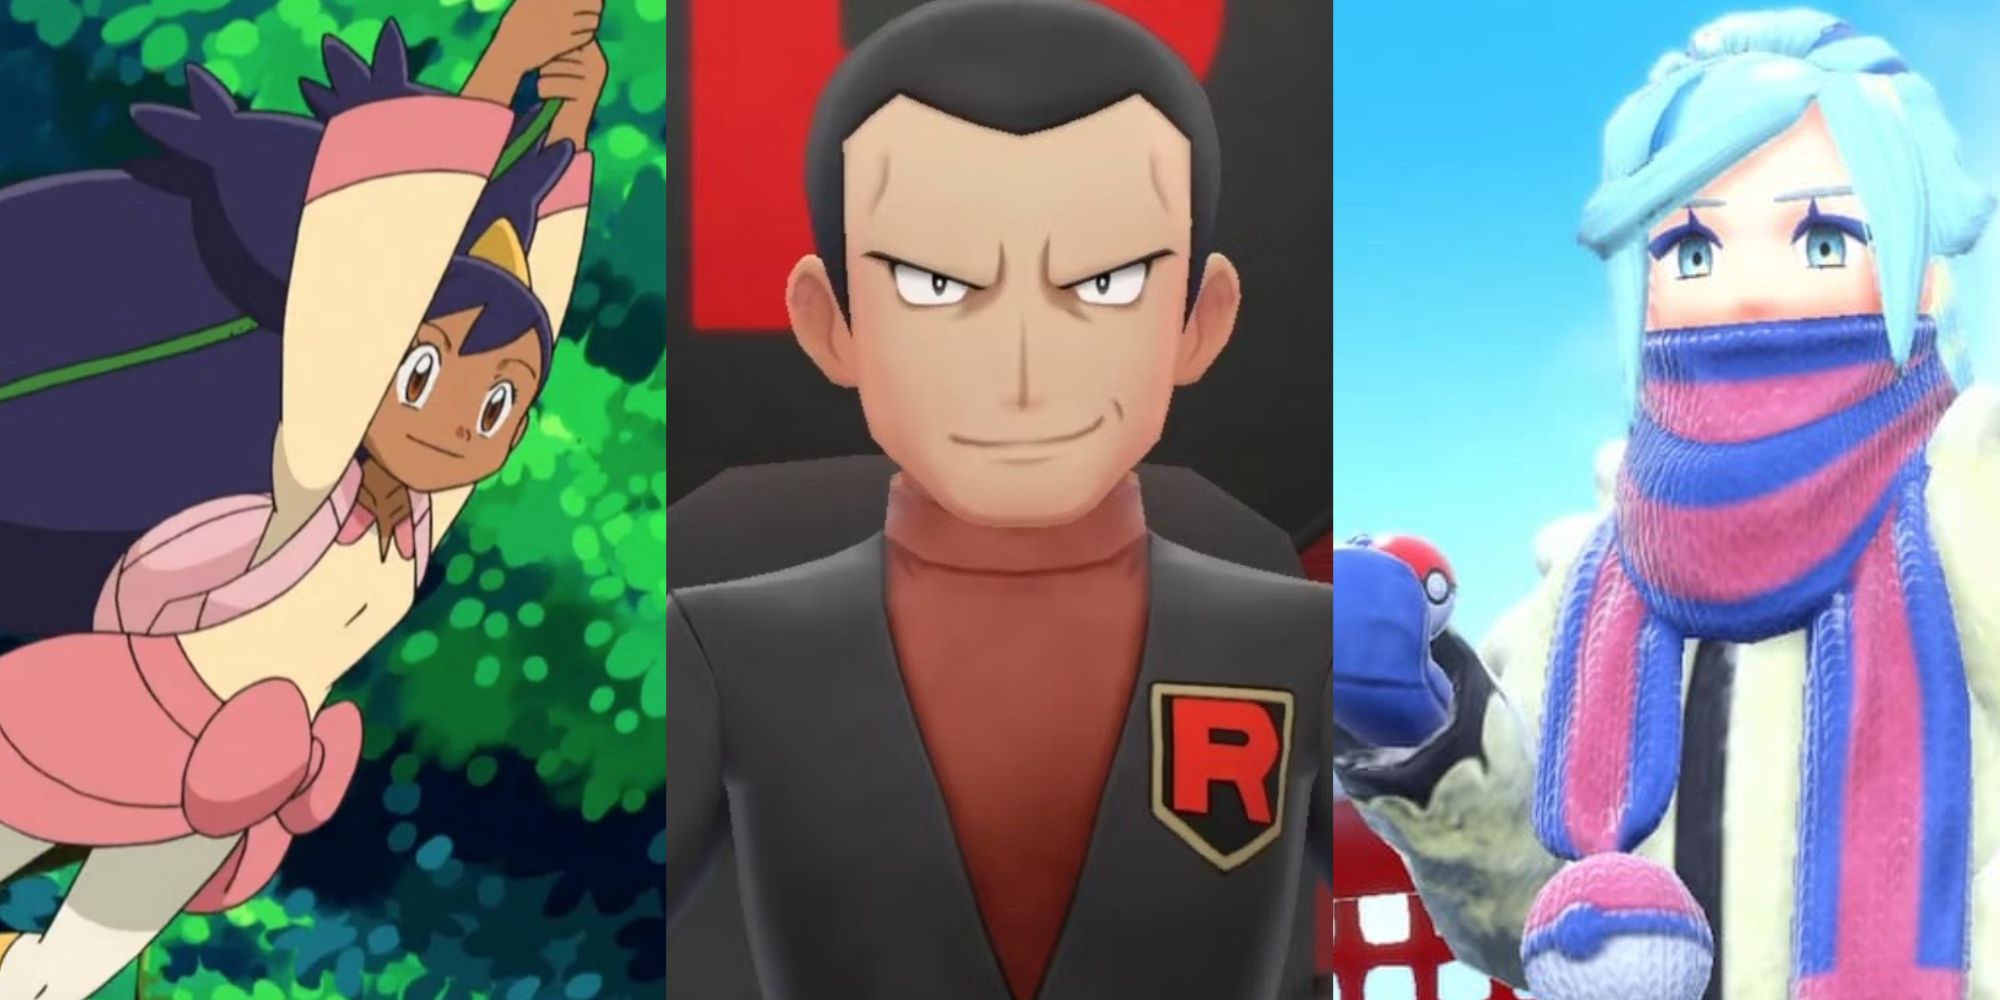 Pokemon Black and White: Every Gym Leader Ranked